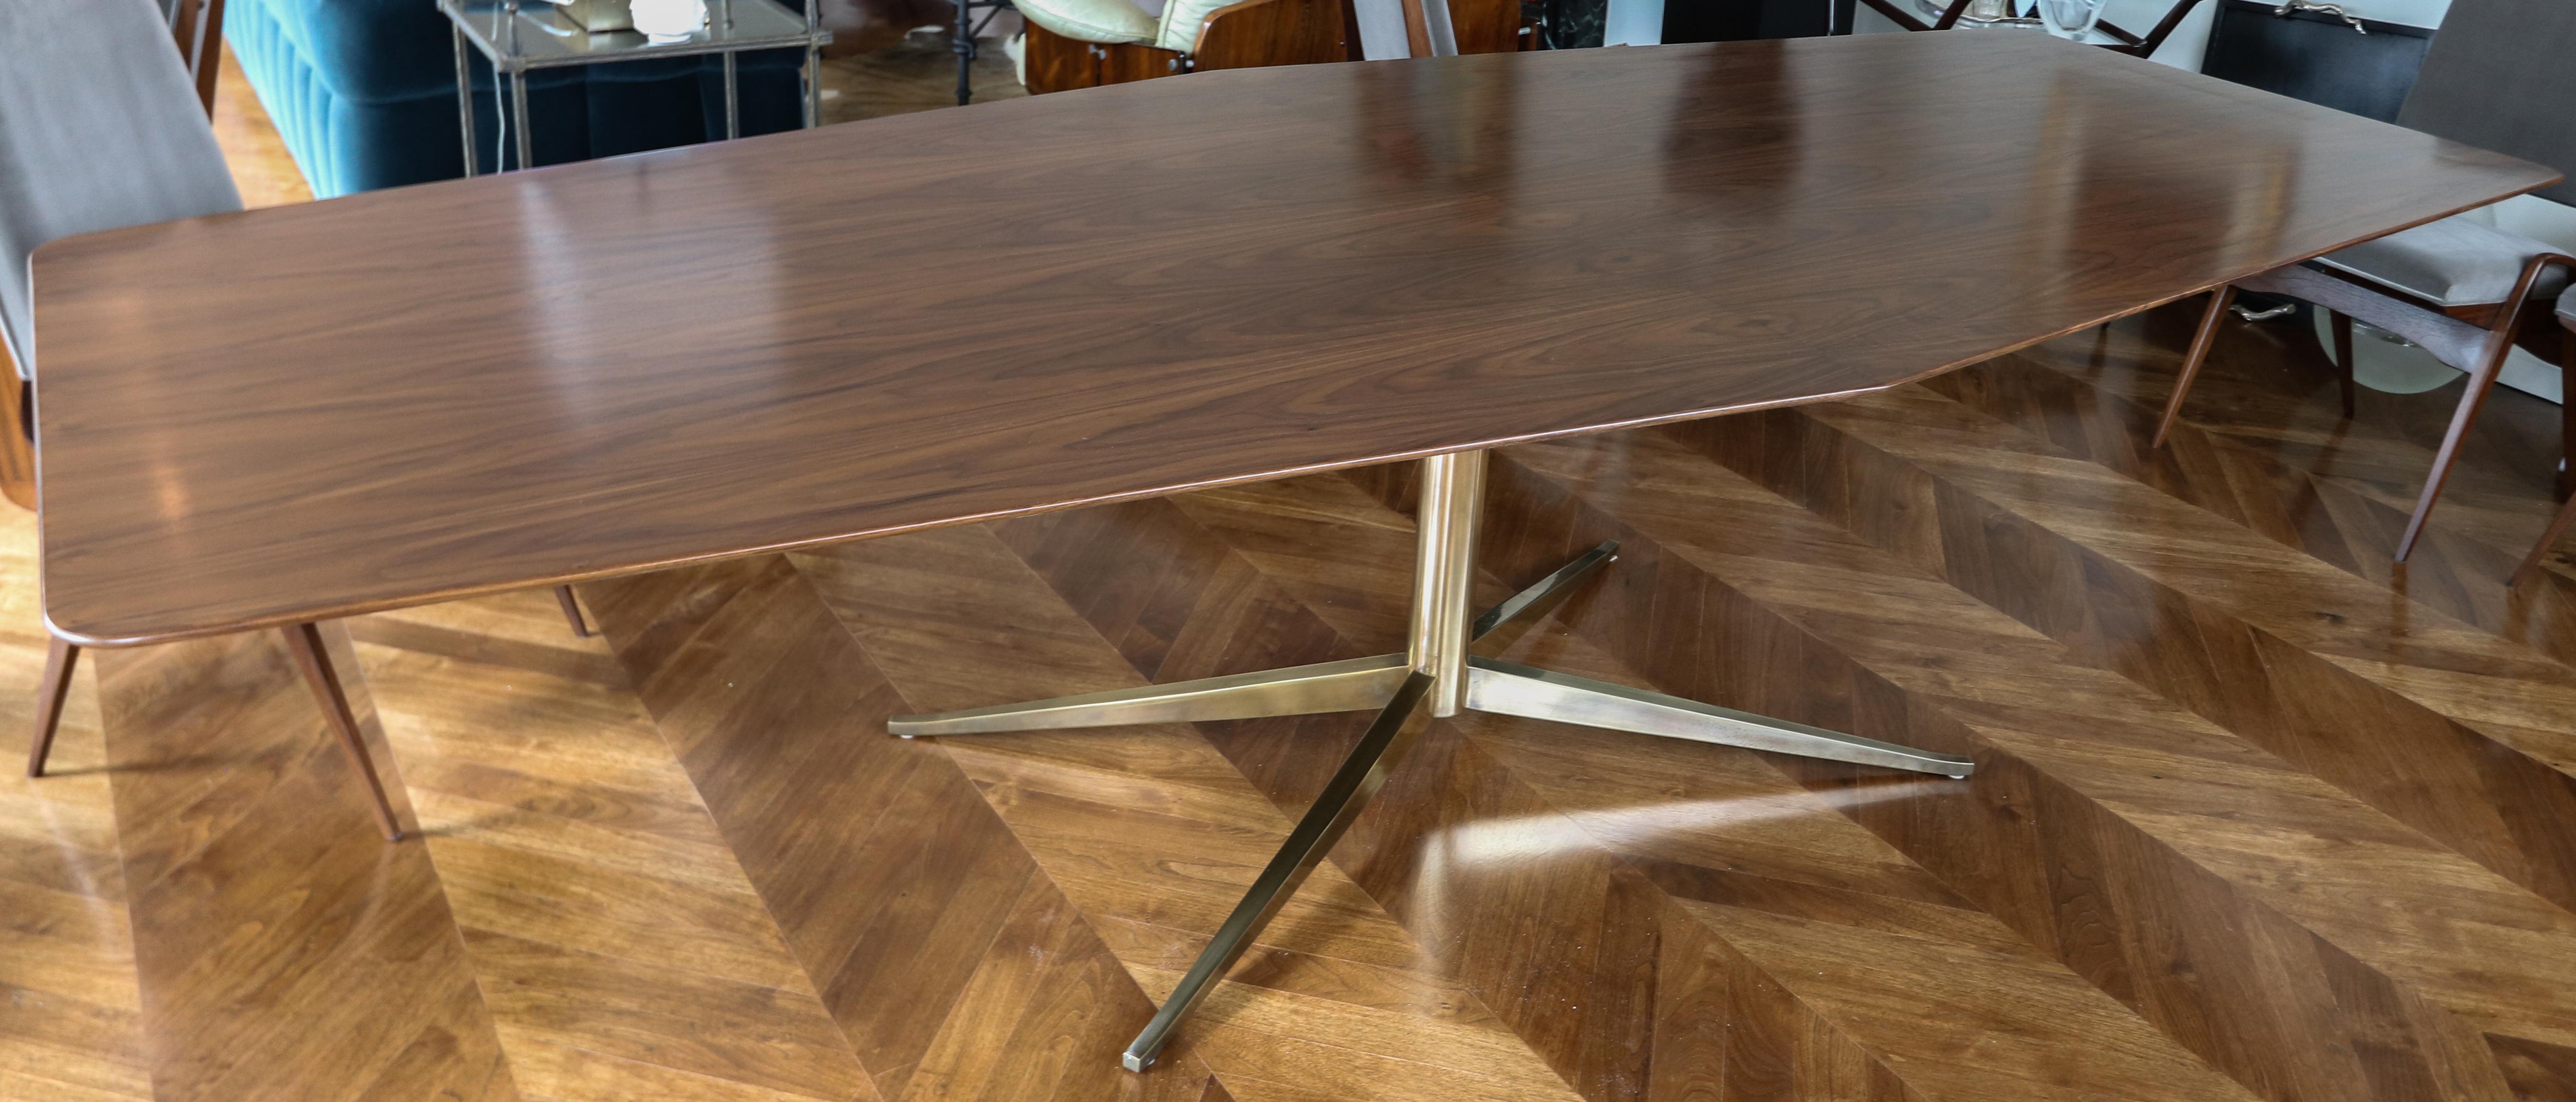 Custom rectangular pedestal dining table with American walnut veneer and brass leg.  Made in Los Angeles by Adesso Import. 

Measures: end depth 34